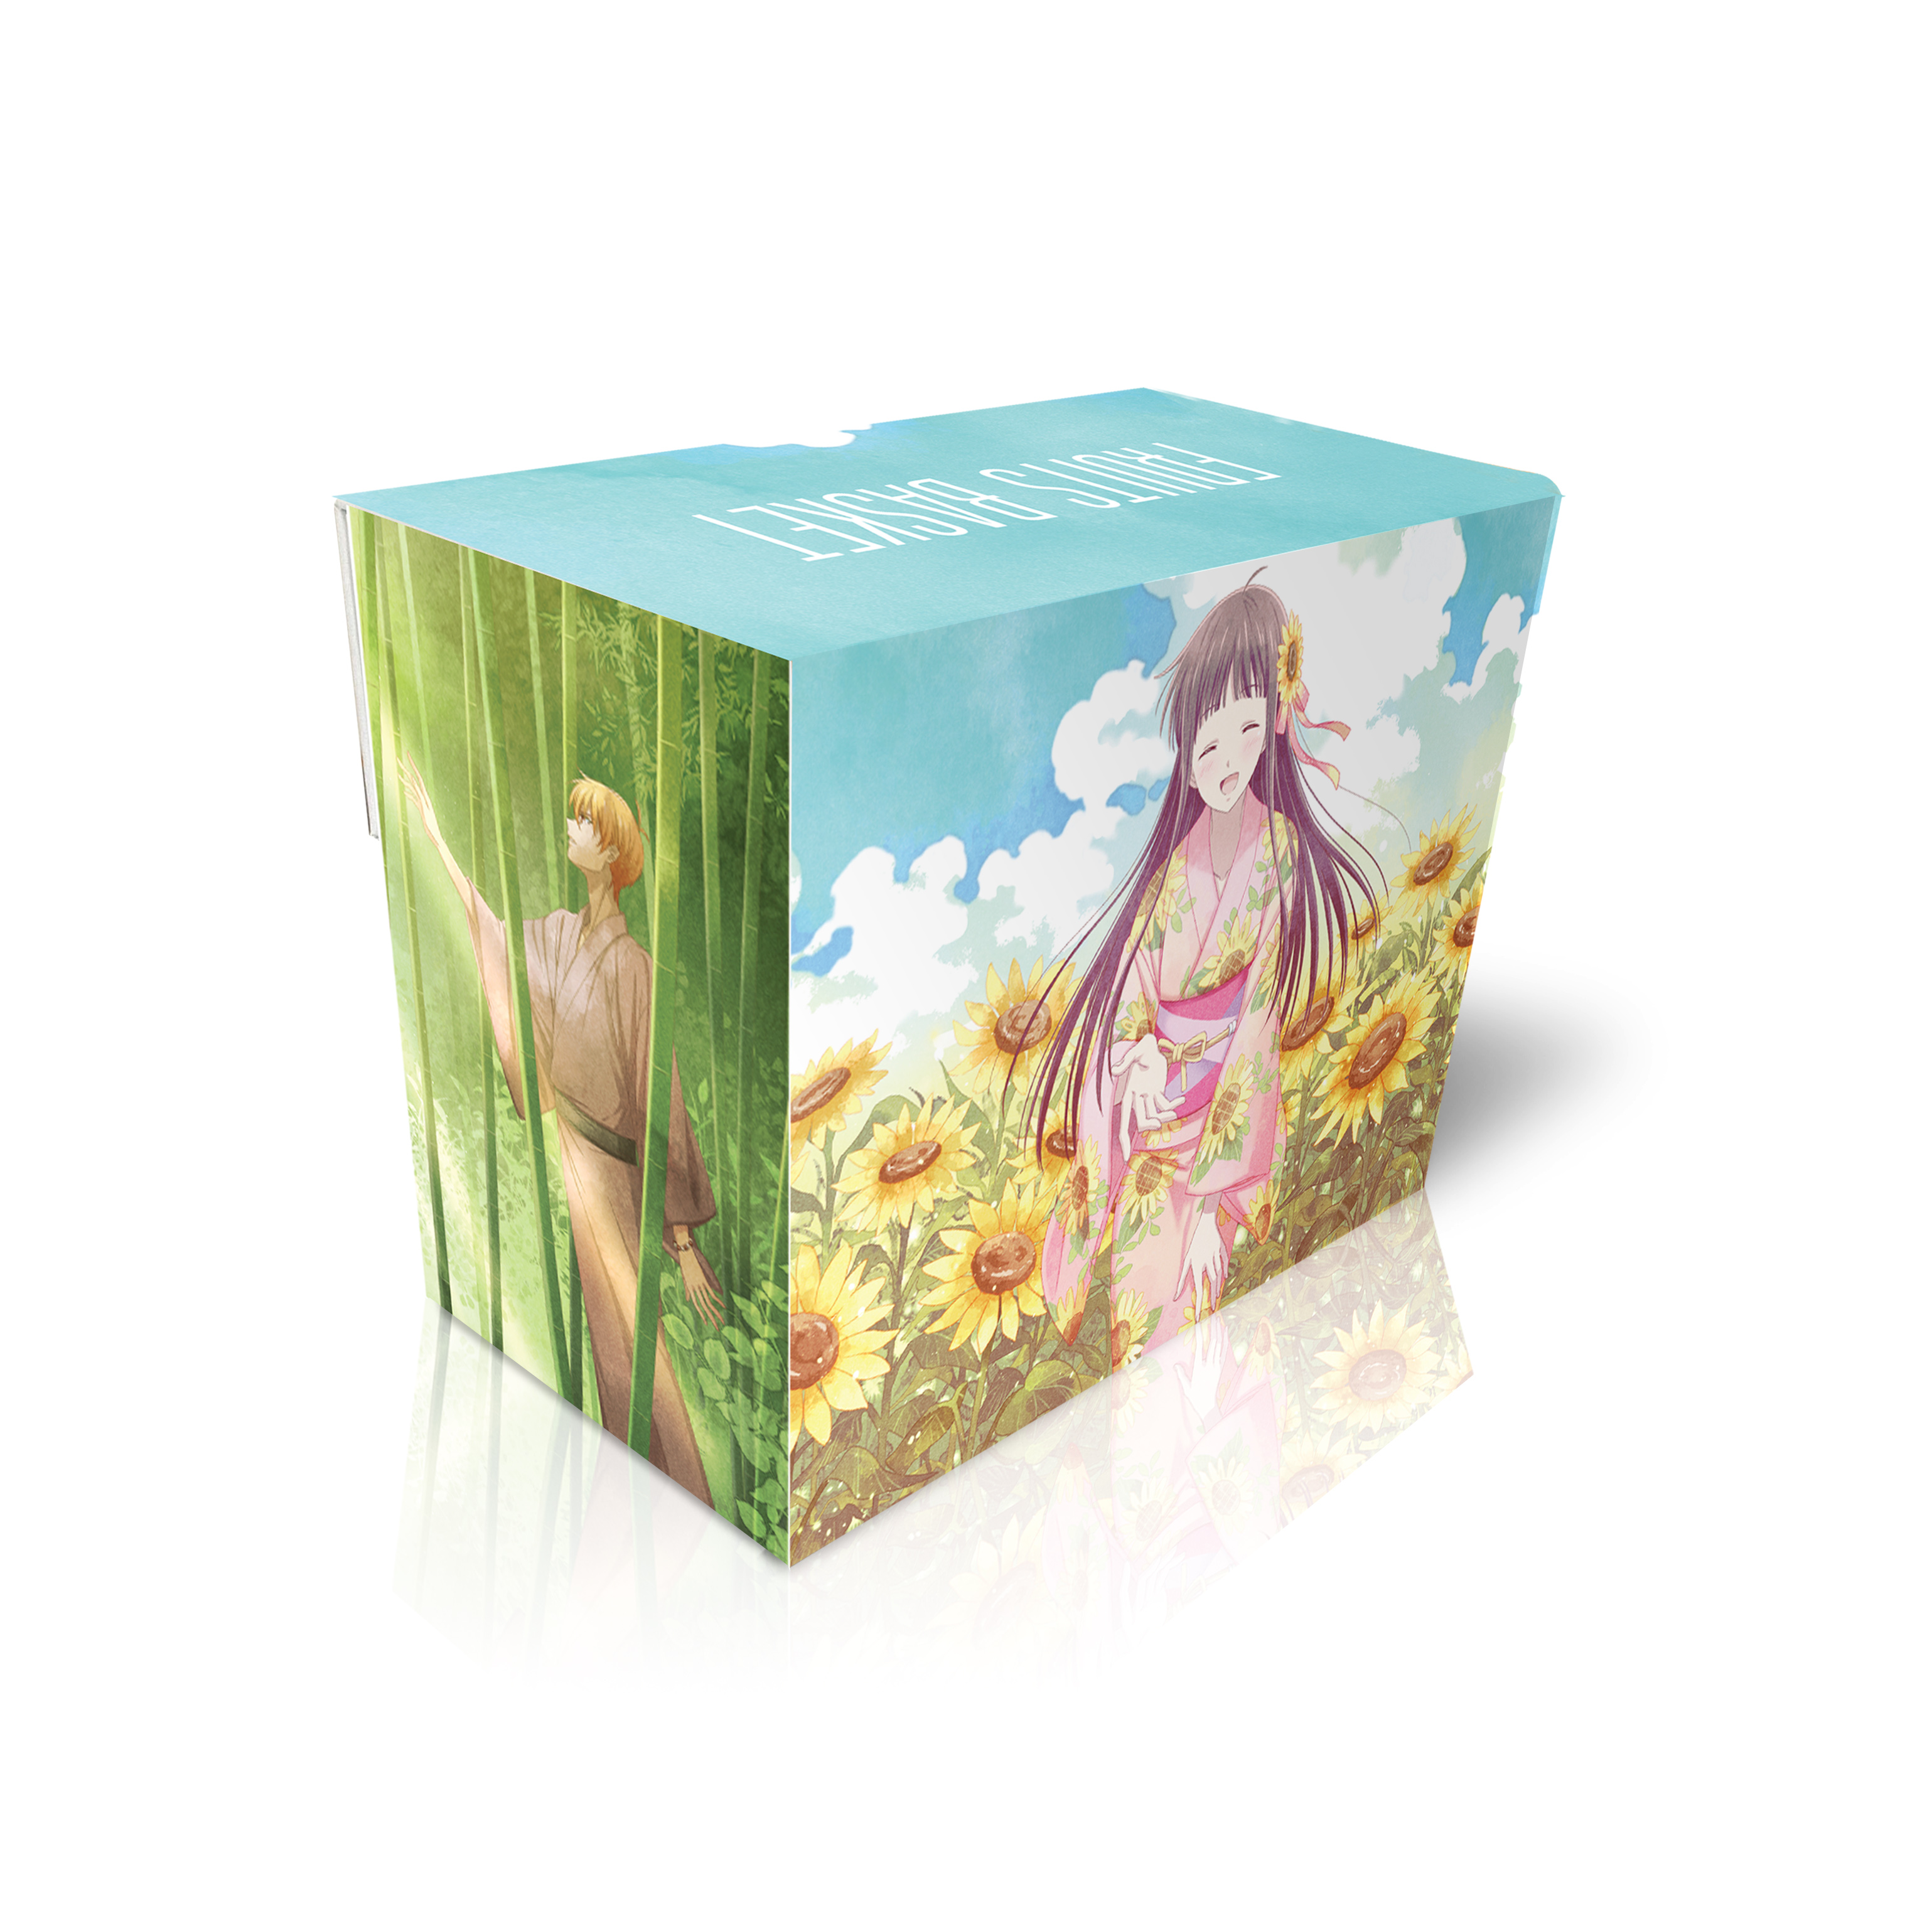 Fruits Basket (2019) - Season 2 Part 1 - Limited Edition - Blu-ray + DVD image count 3